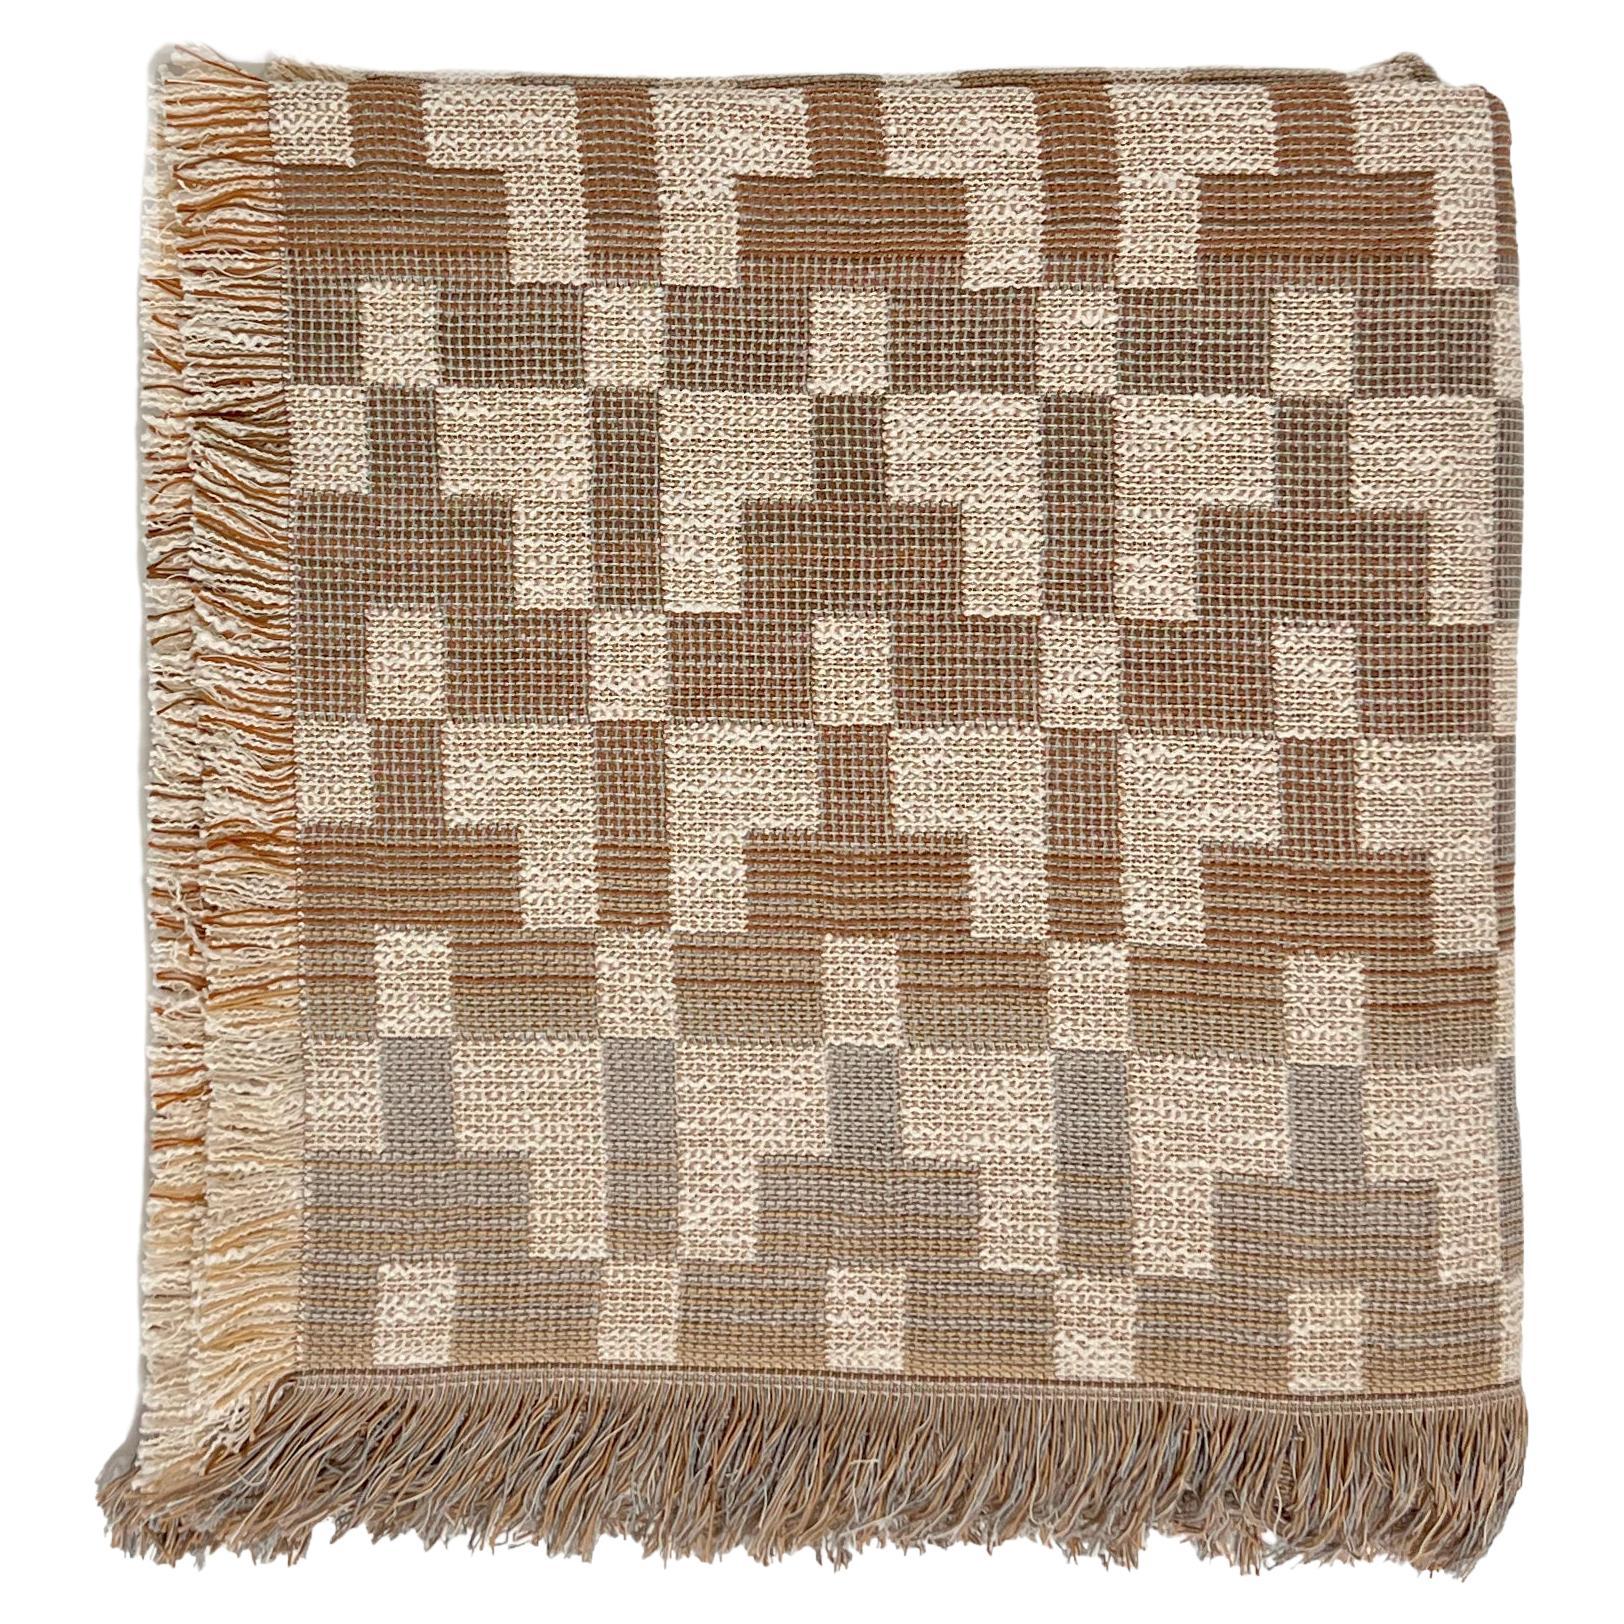 Patterned Woven Cotton Throw Blanket by Folk Textiles (Esme / Rust)